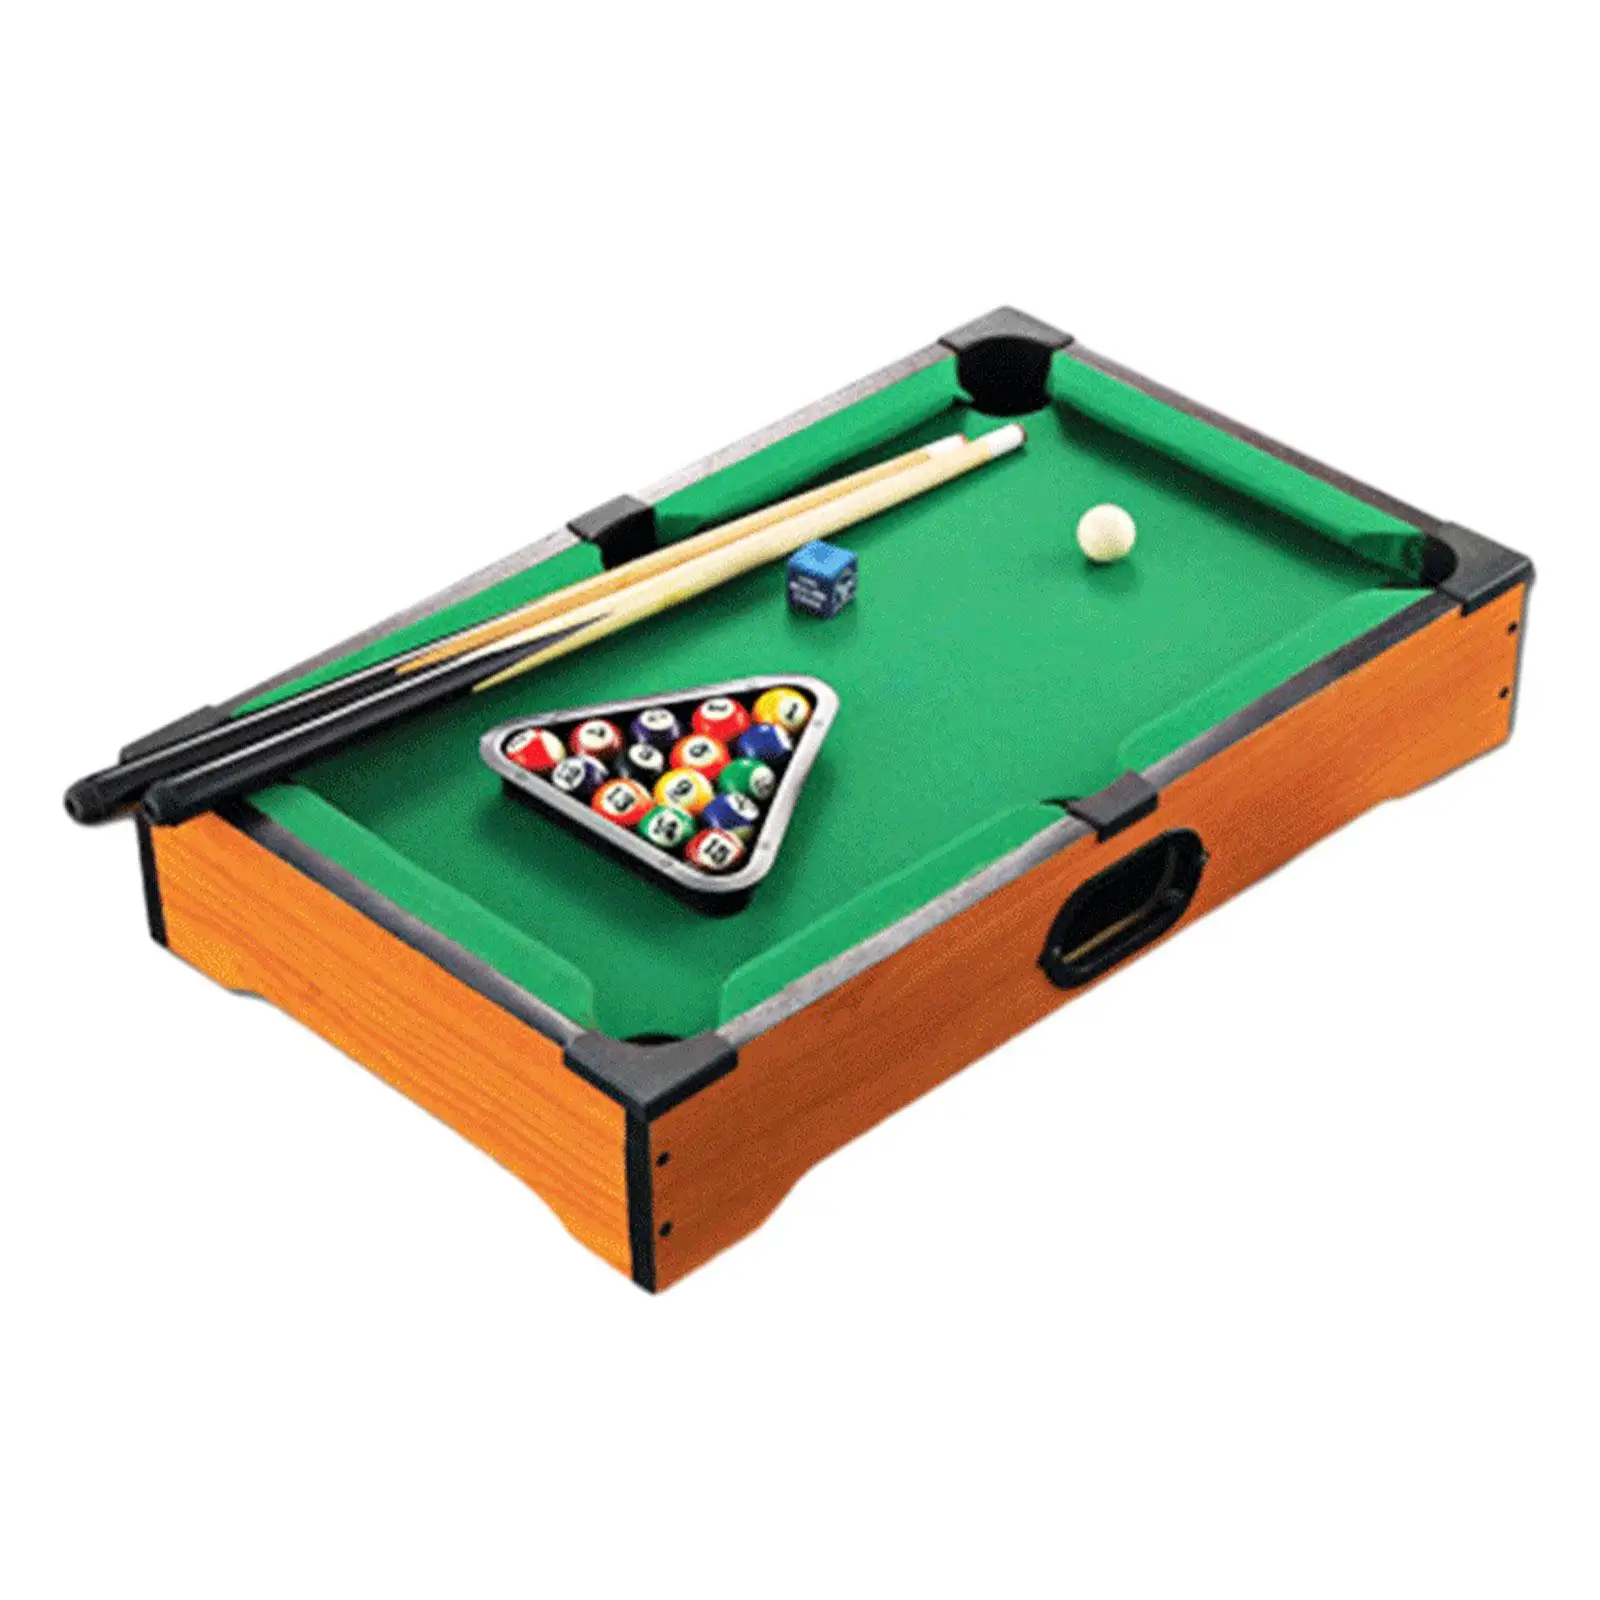 Mini Pool Table with Game Balls Portable Snooker for Playhouse Office Desk